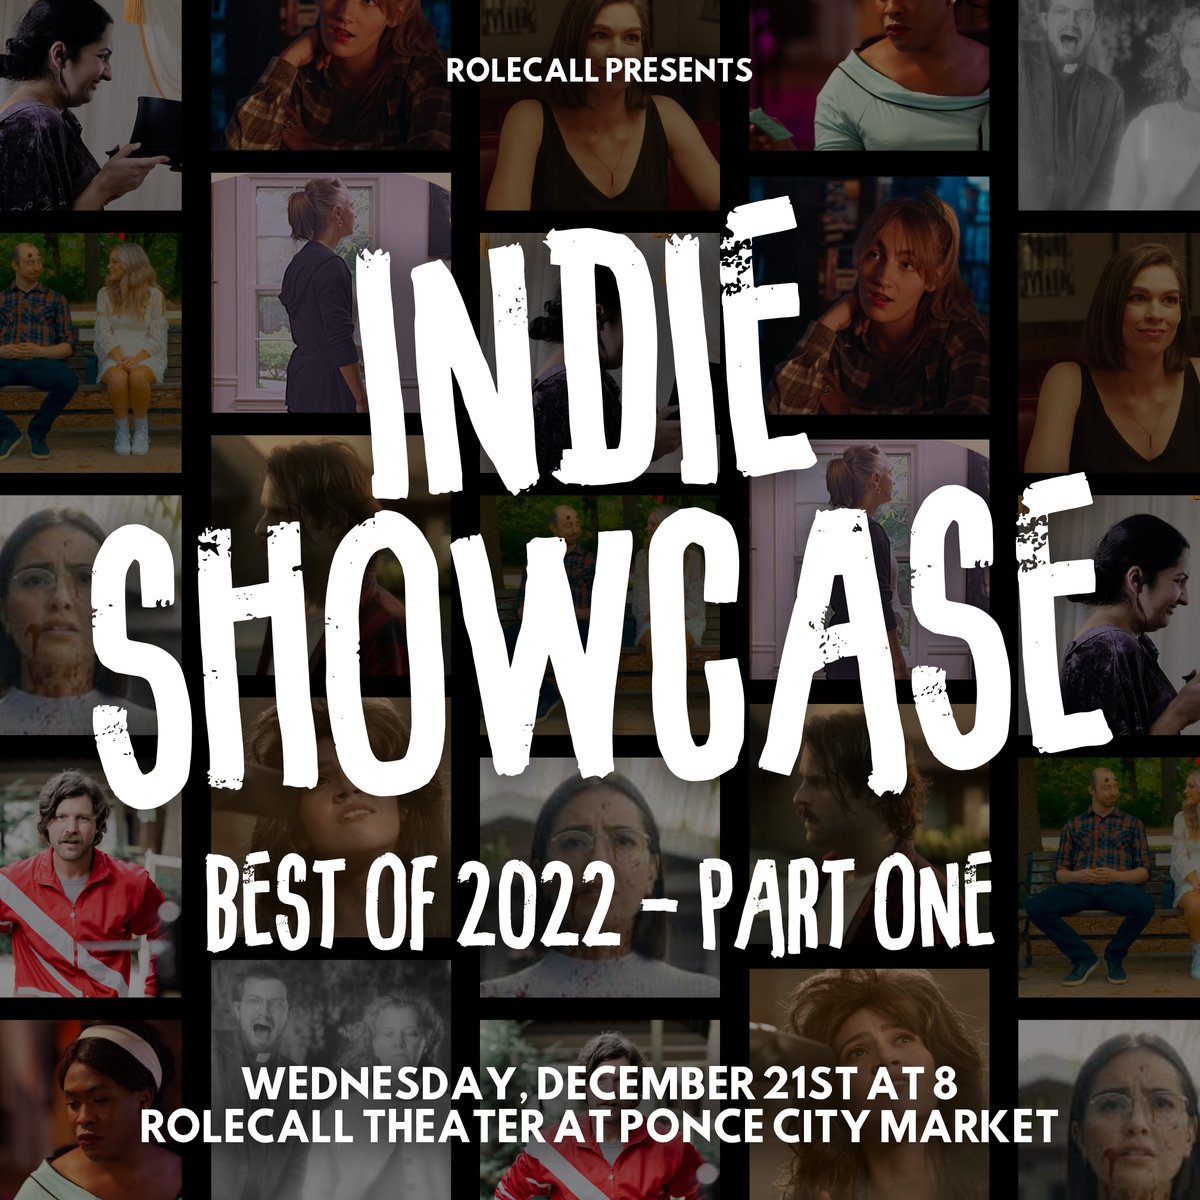 Don’t miss us this Wednesday night at 8pm in RoleCall Indie Showcase’s Best of 2022! Tix link: buff.ly/3S4w4kw 
#georgiafilm #indiefilm #CouldThisHaveBeenAnEmail #rolecalltheater #weloveatl